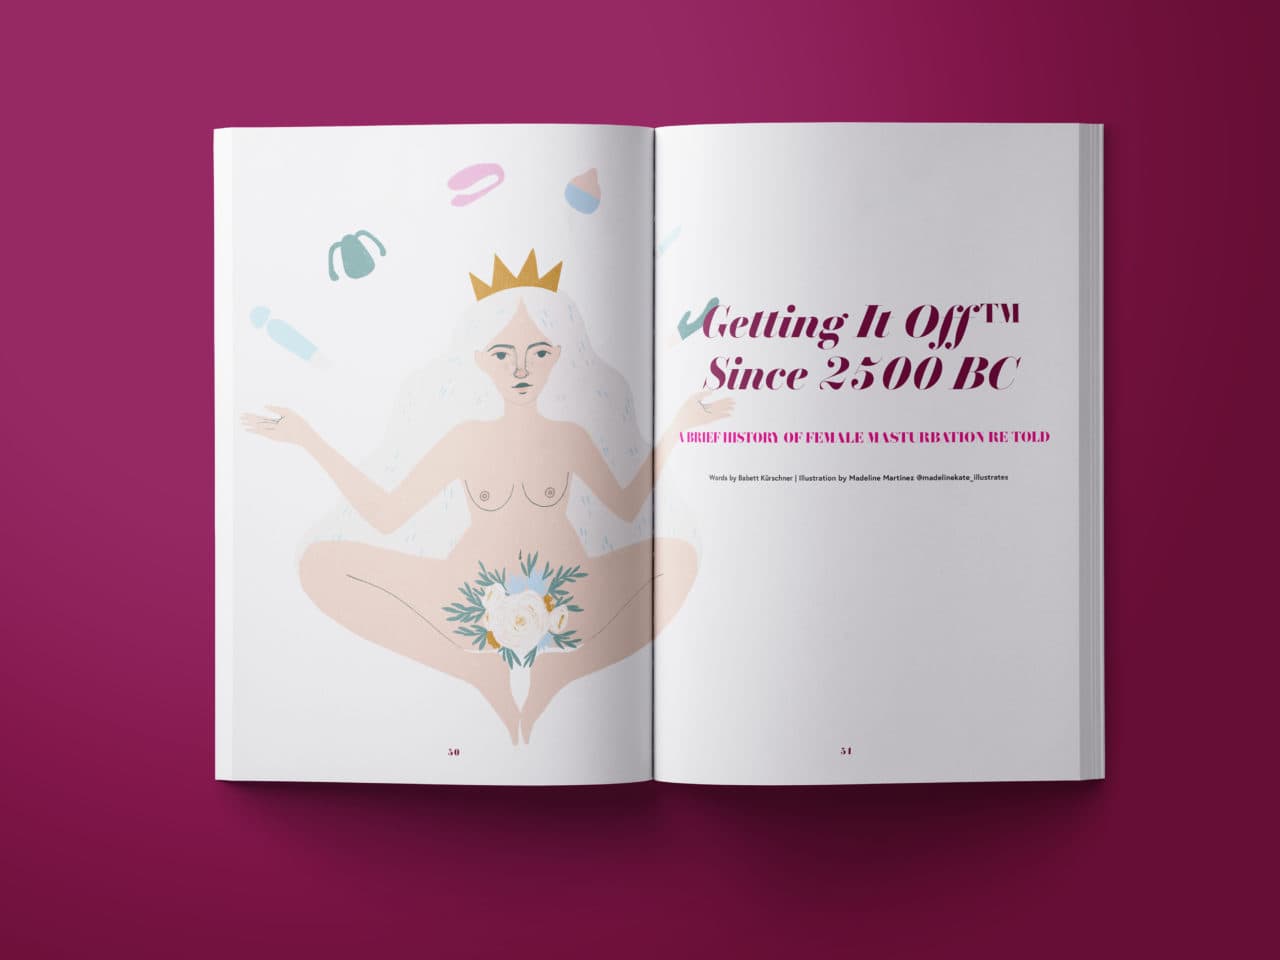 In some pages of Vagina-nomics, there is an illustration of a naked female spreading their hands and having a bouquet covering the genitalia.